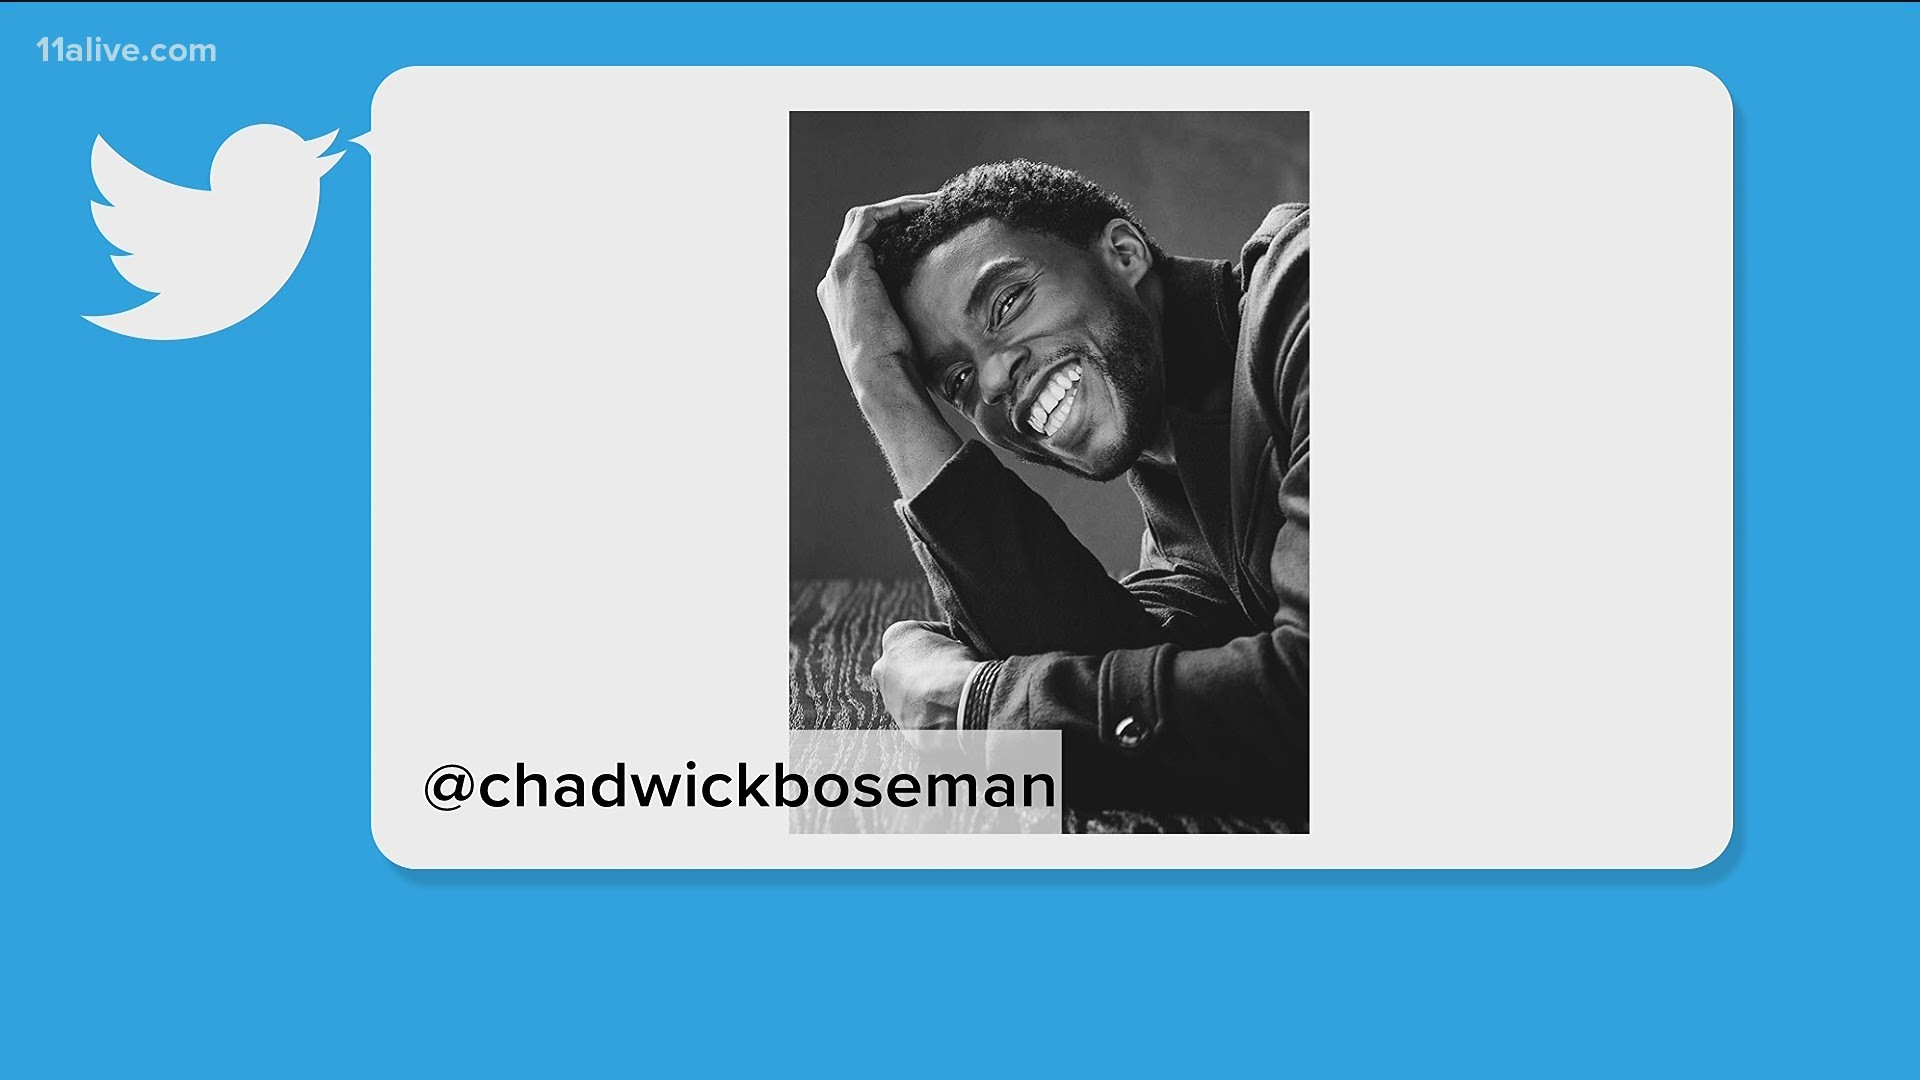 Actor Chadwick Boseman was diagnosed with colon cancer four years ago, according to his family.